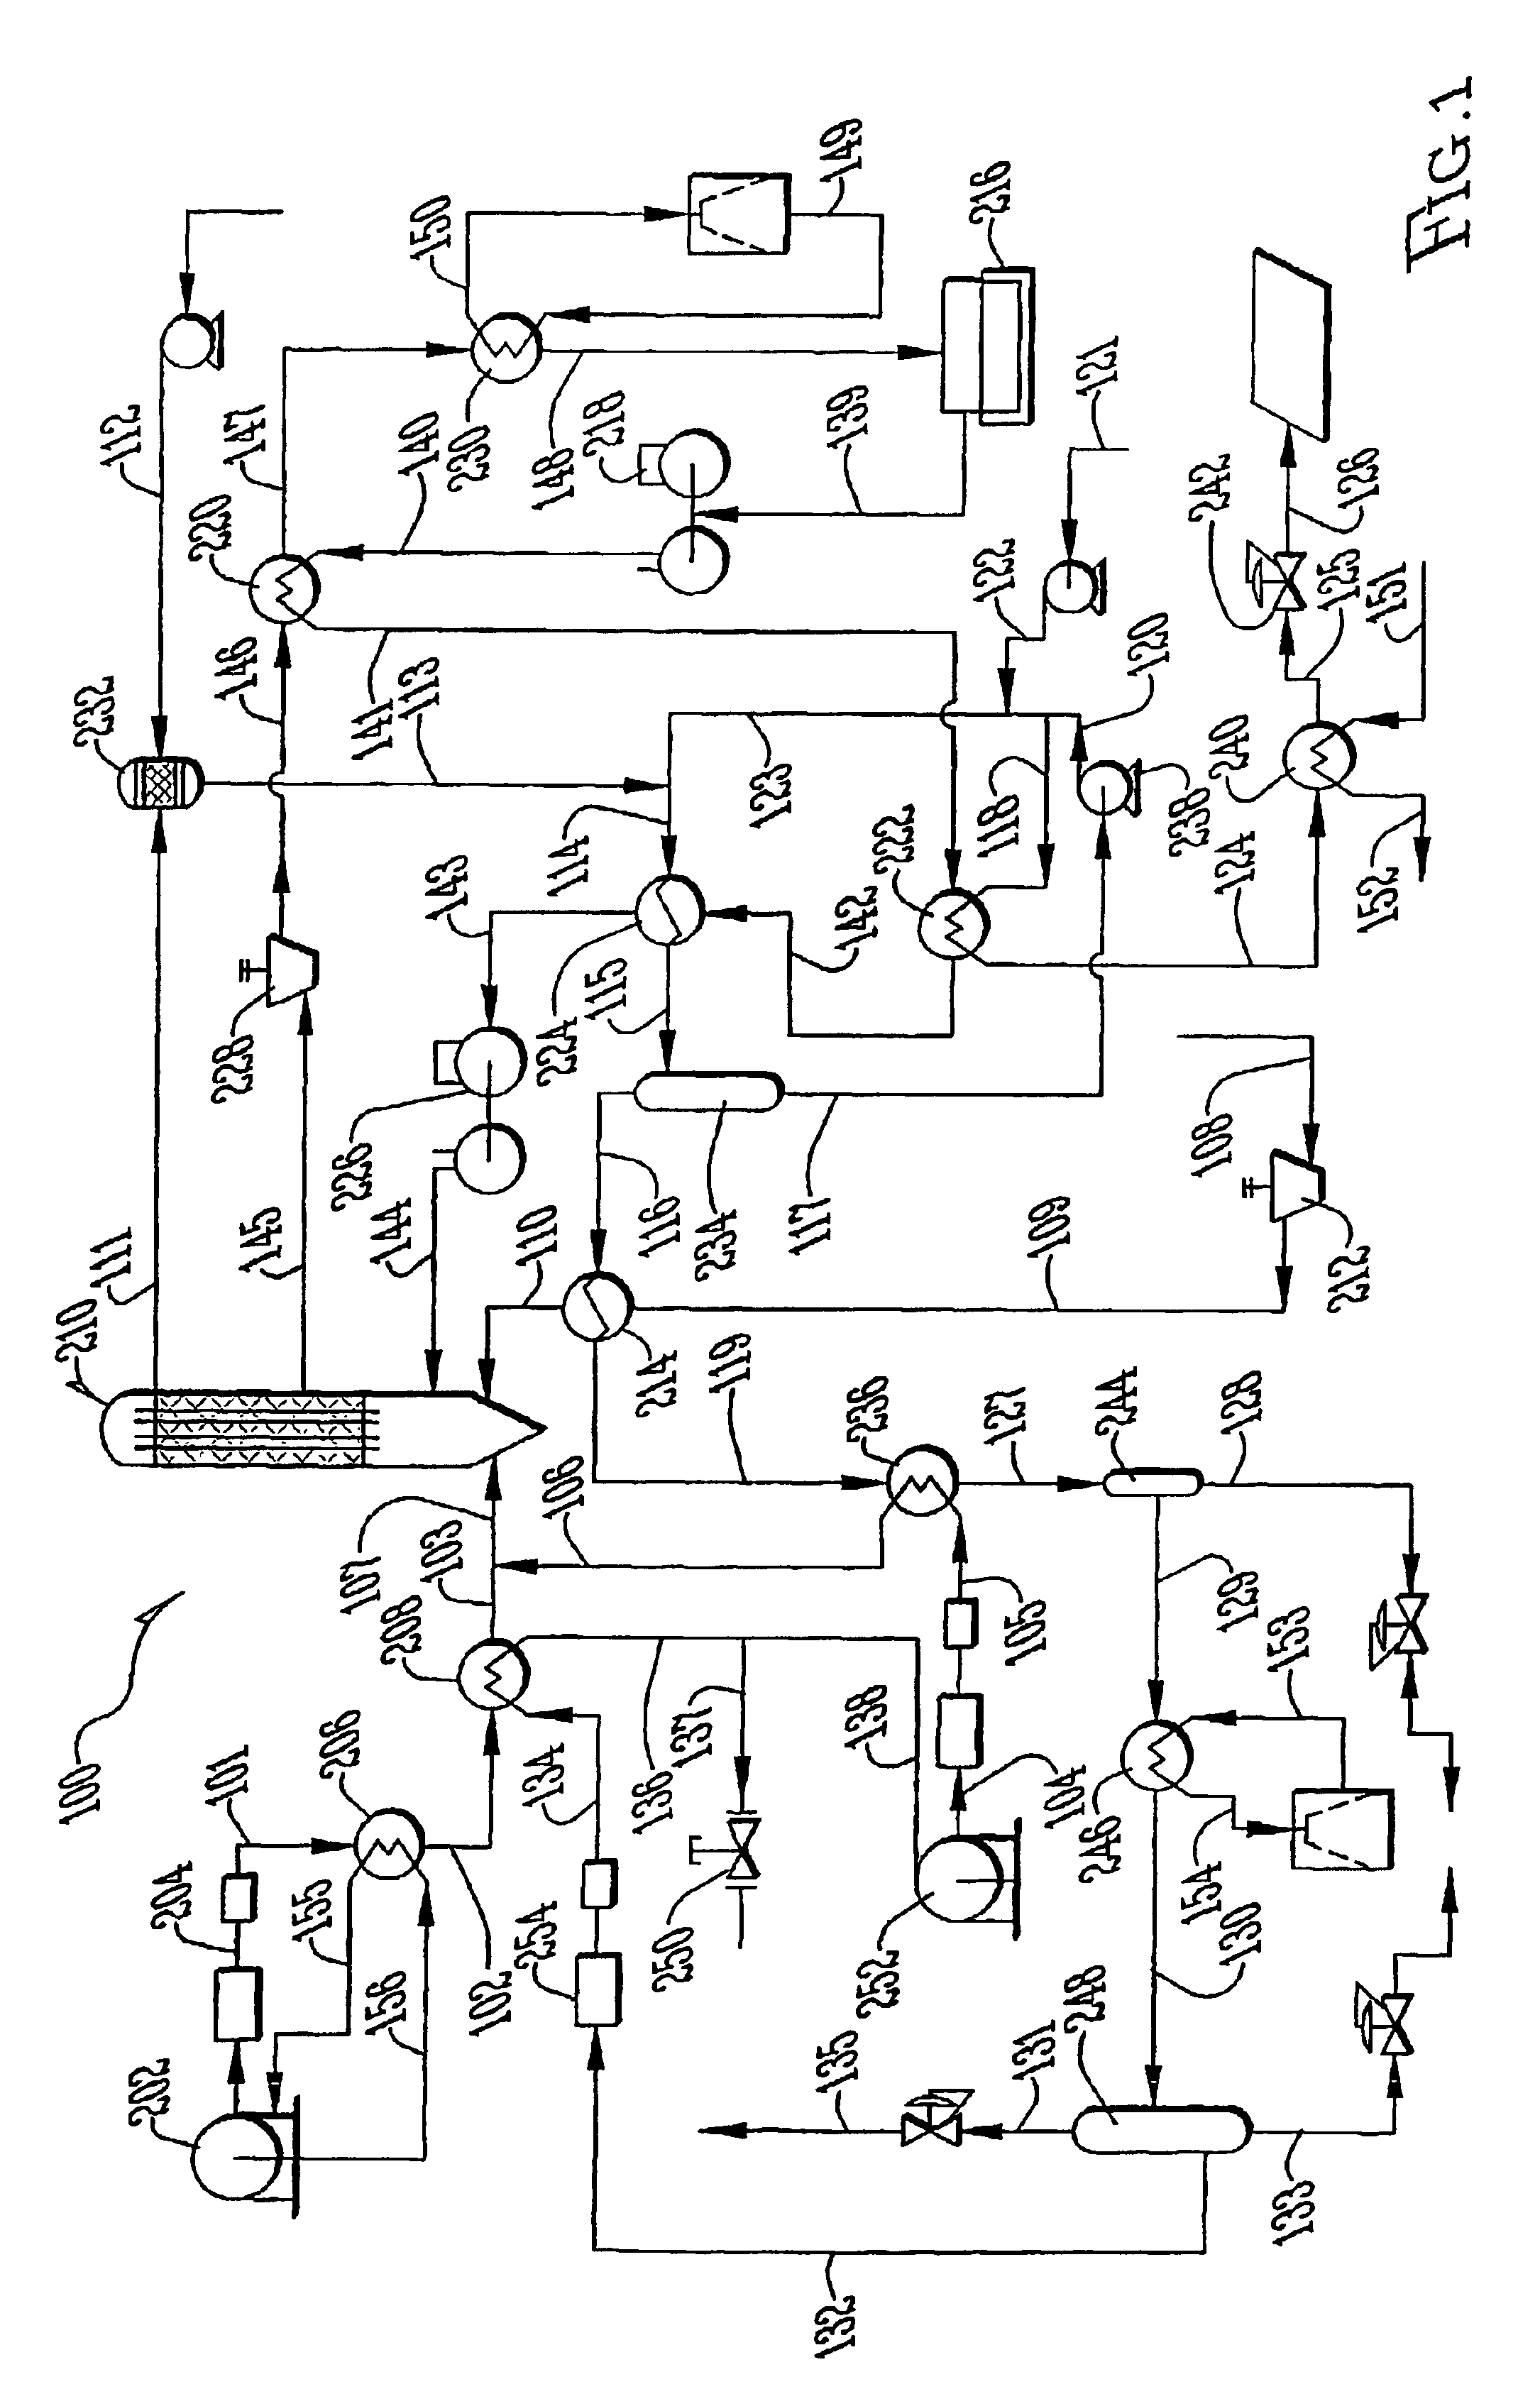 Power system with enhanced thermodynamic efficiency and pollution control